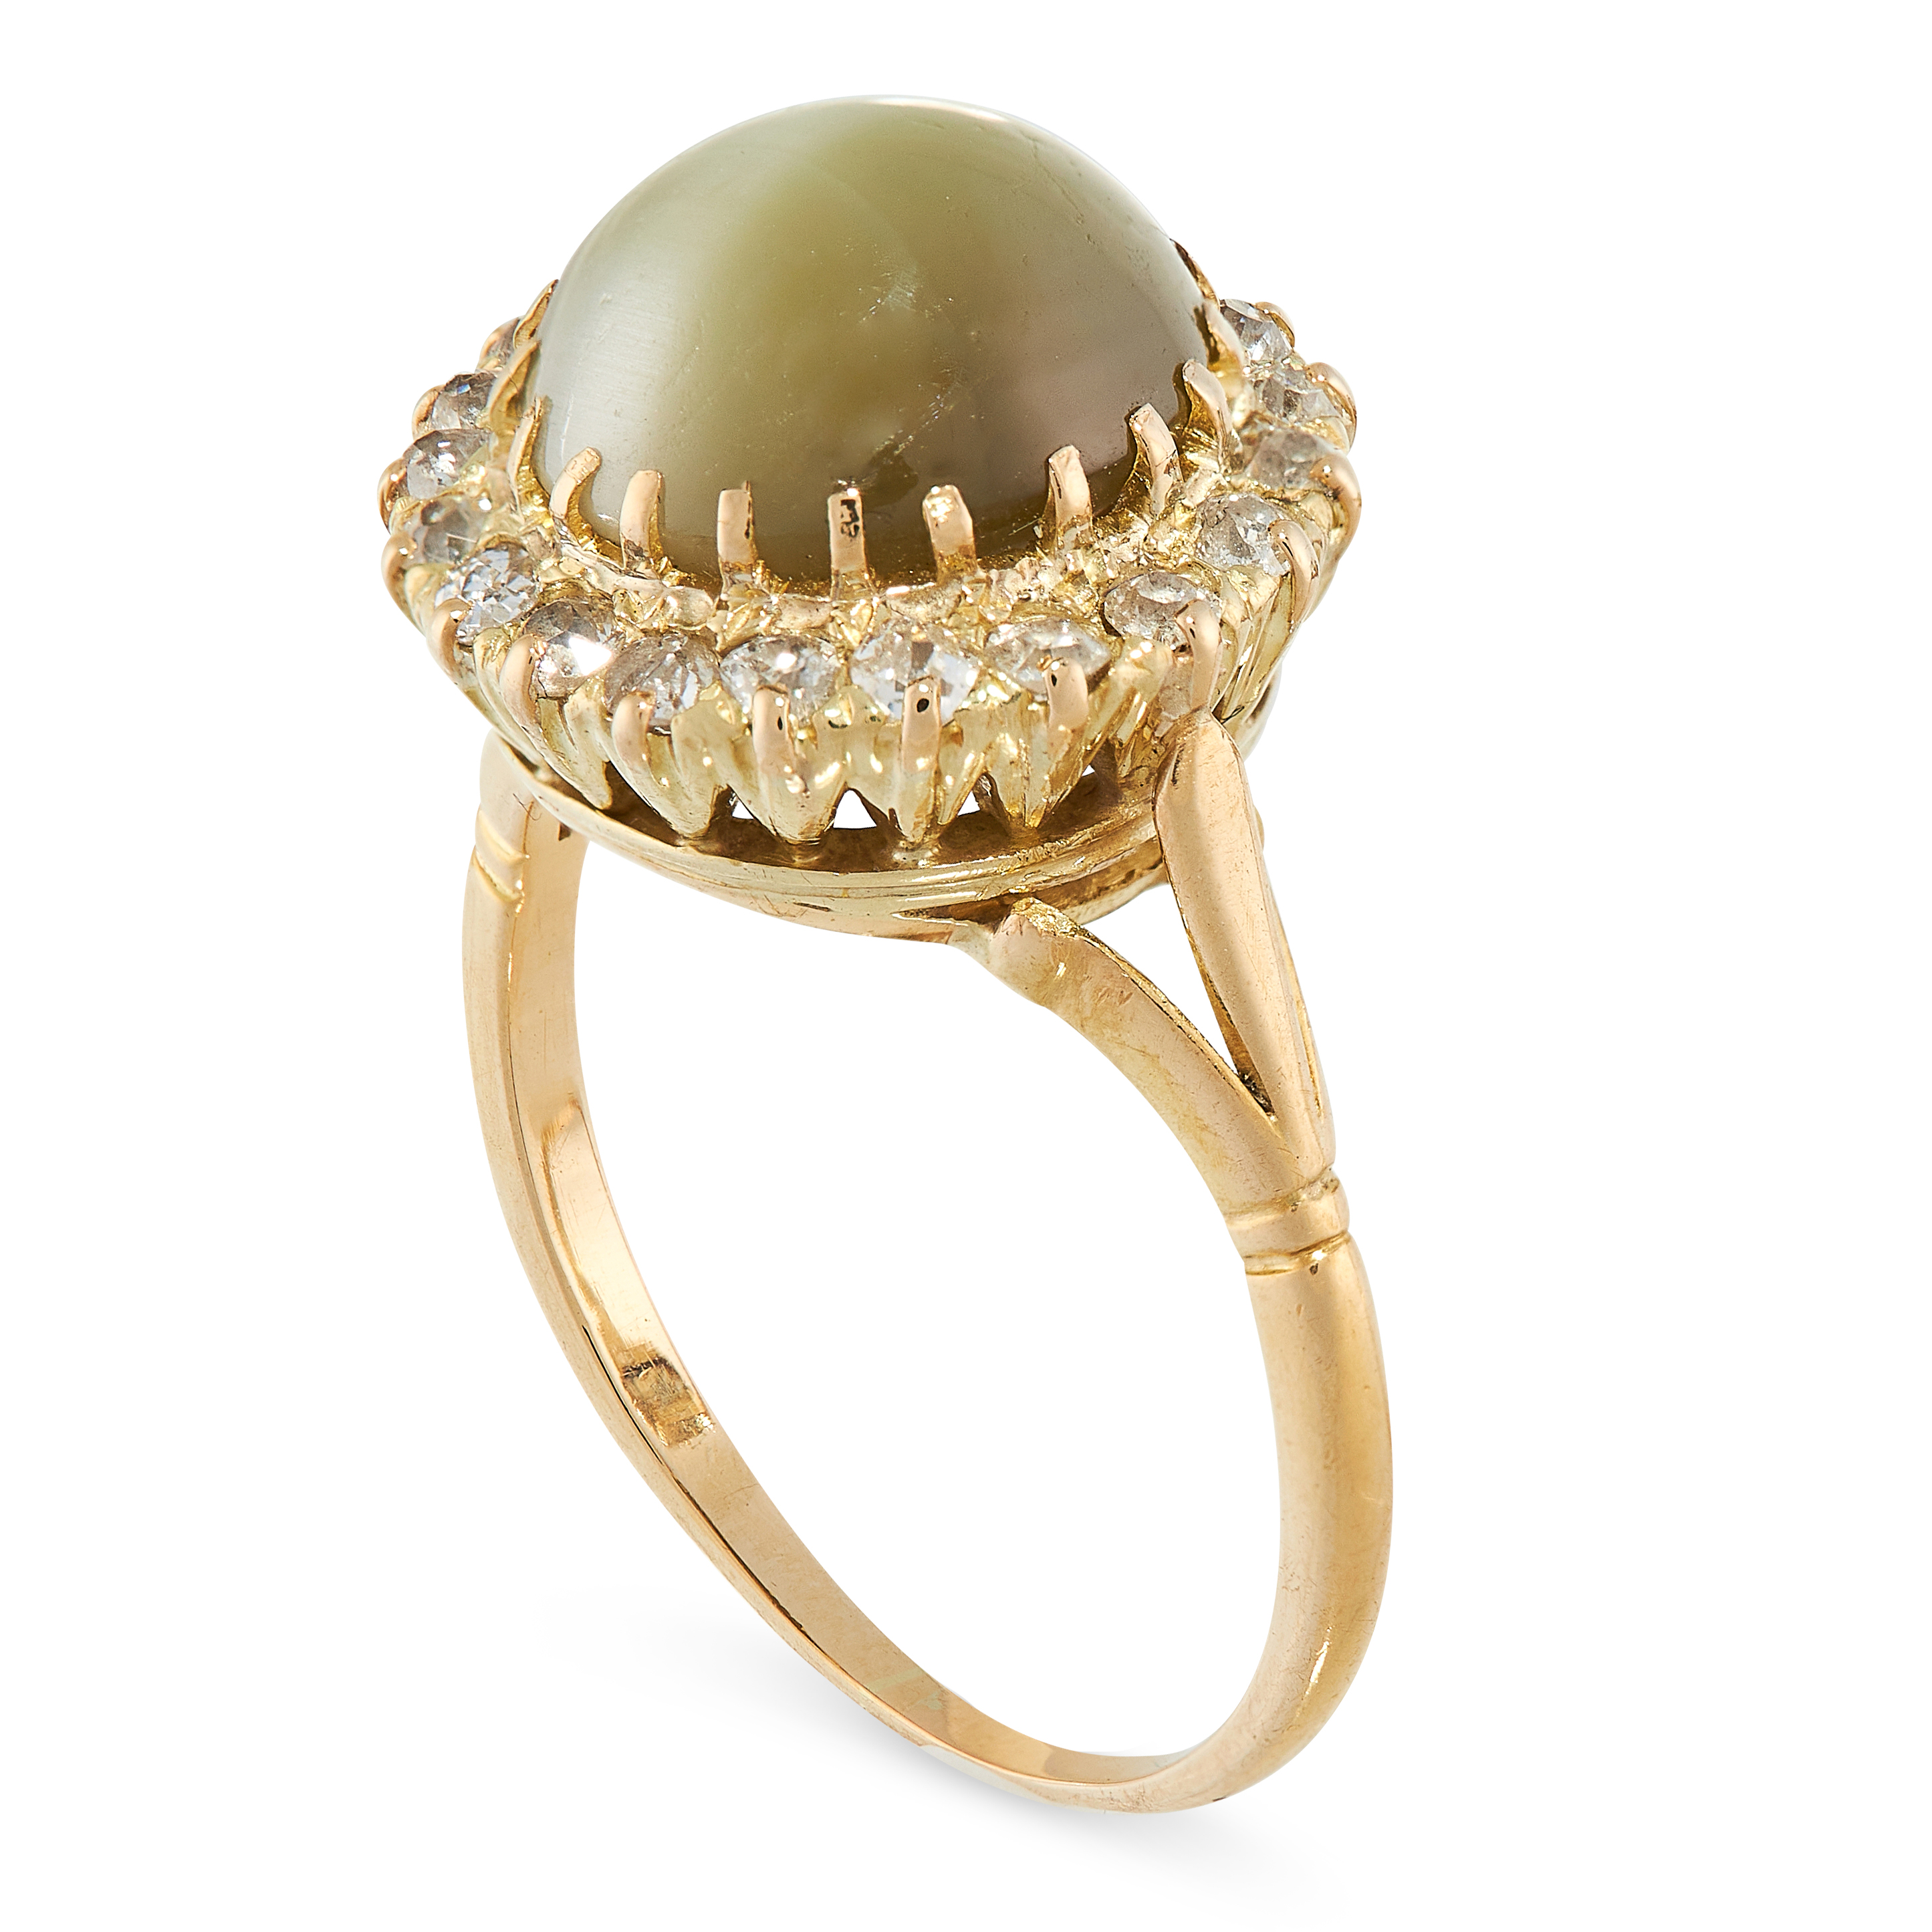 ANTIQUE CAT’S EYE CHRYSOBERYL AND DIAMOND RING in yellow gold, in cluster form, set with a - Image 2 of 2